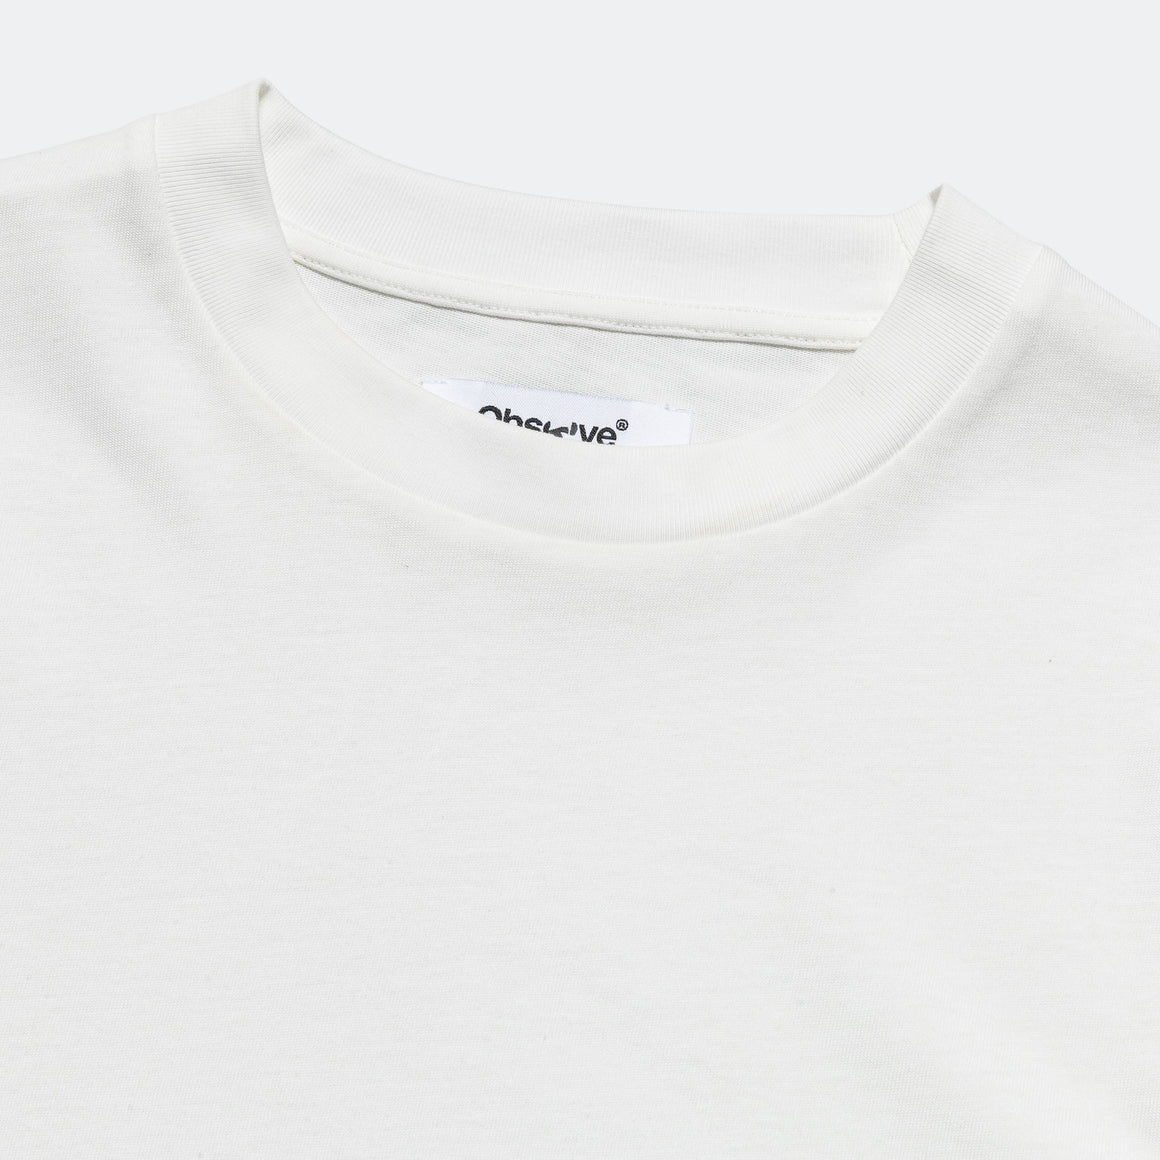 Observe - Everyday T-Shirt - White - UP THERE